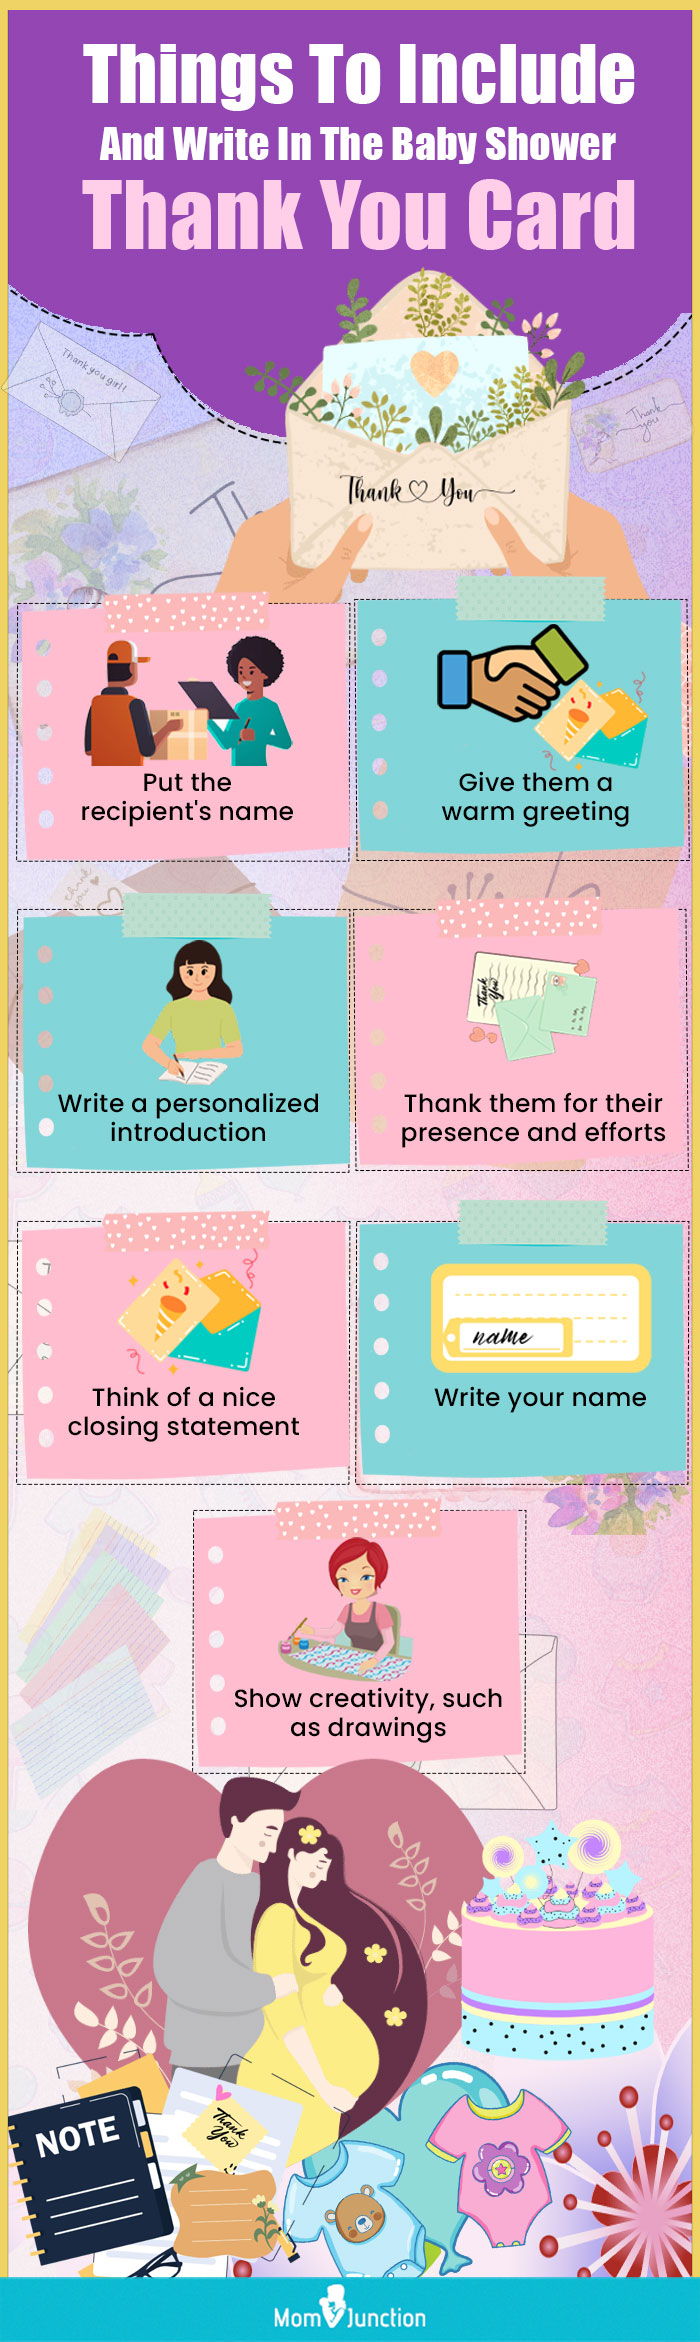 things to include and write in the baby shower thank you card (infographic)